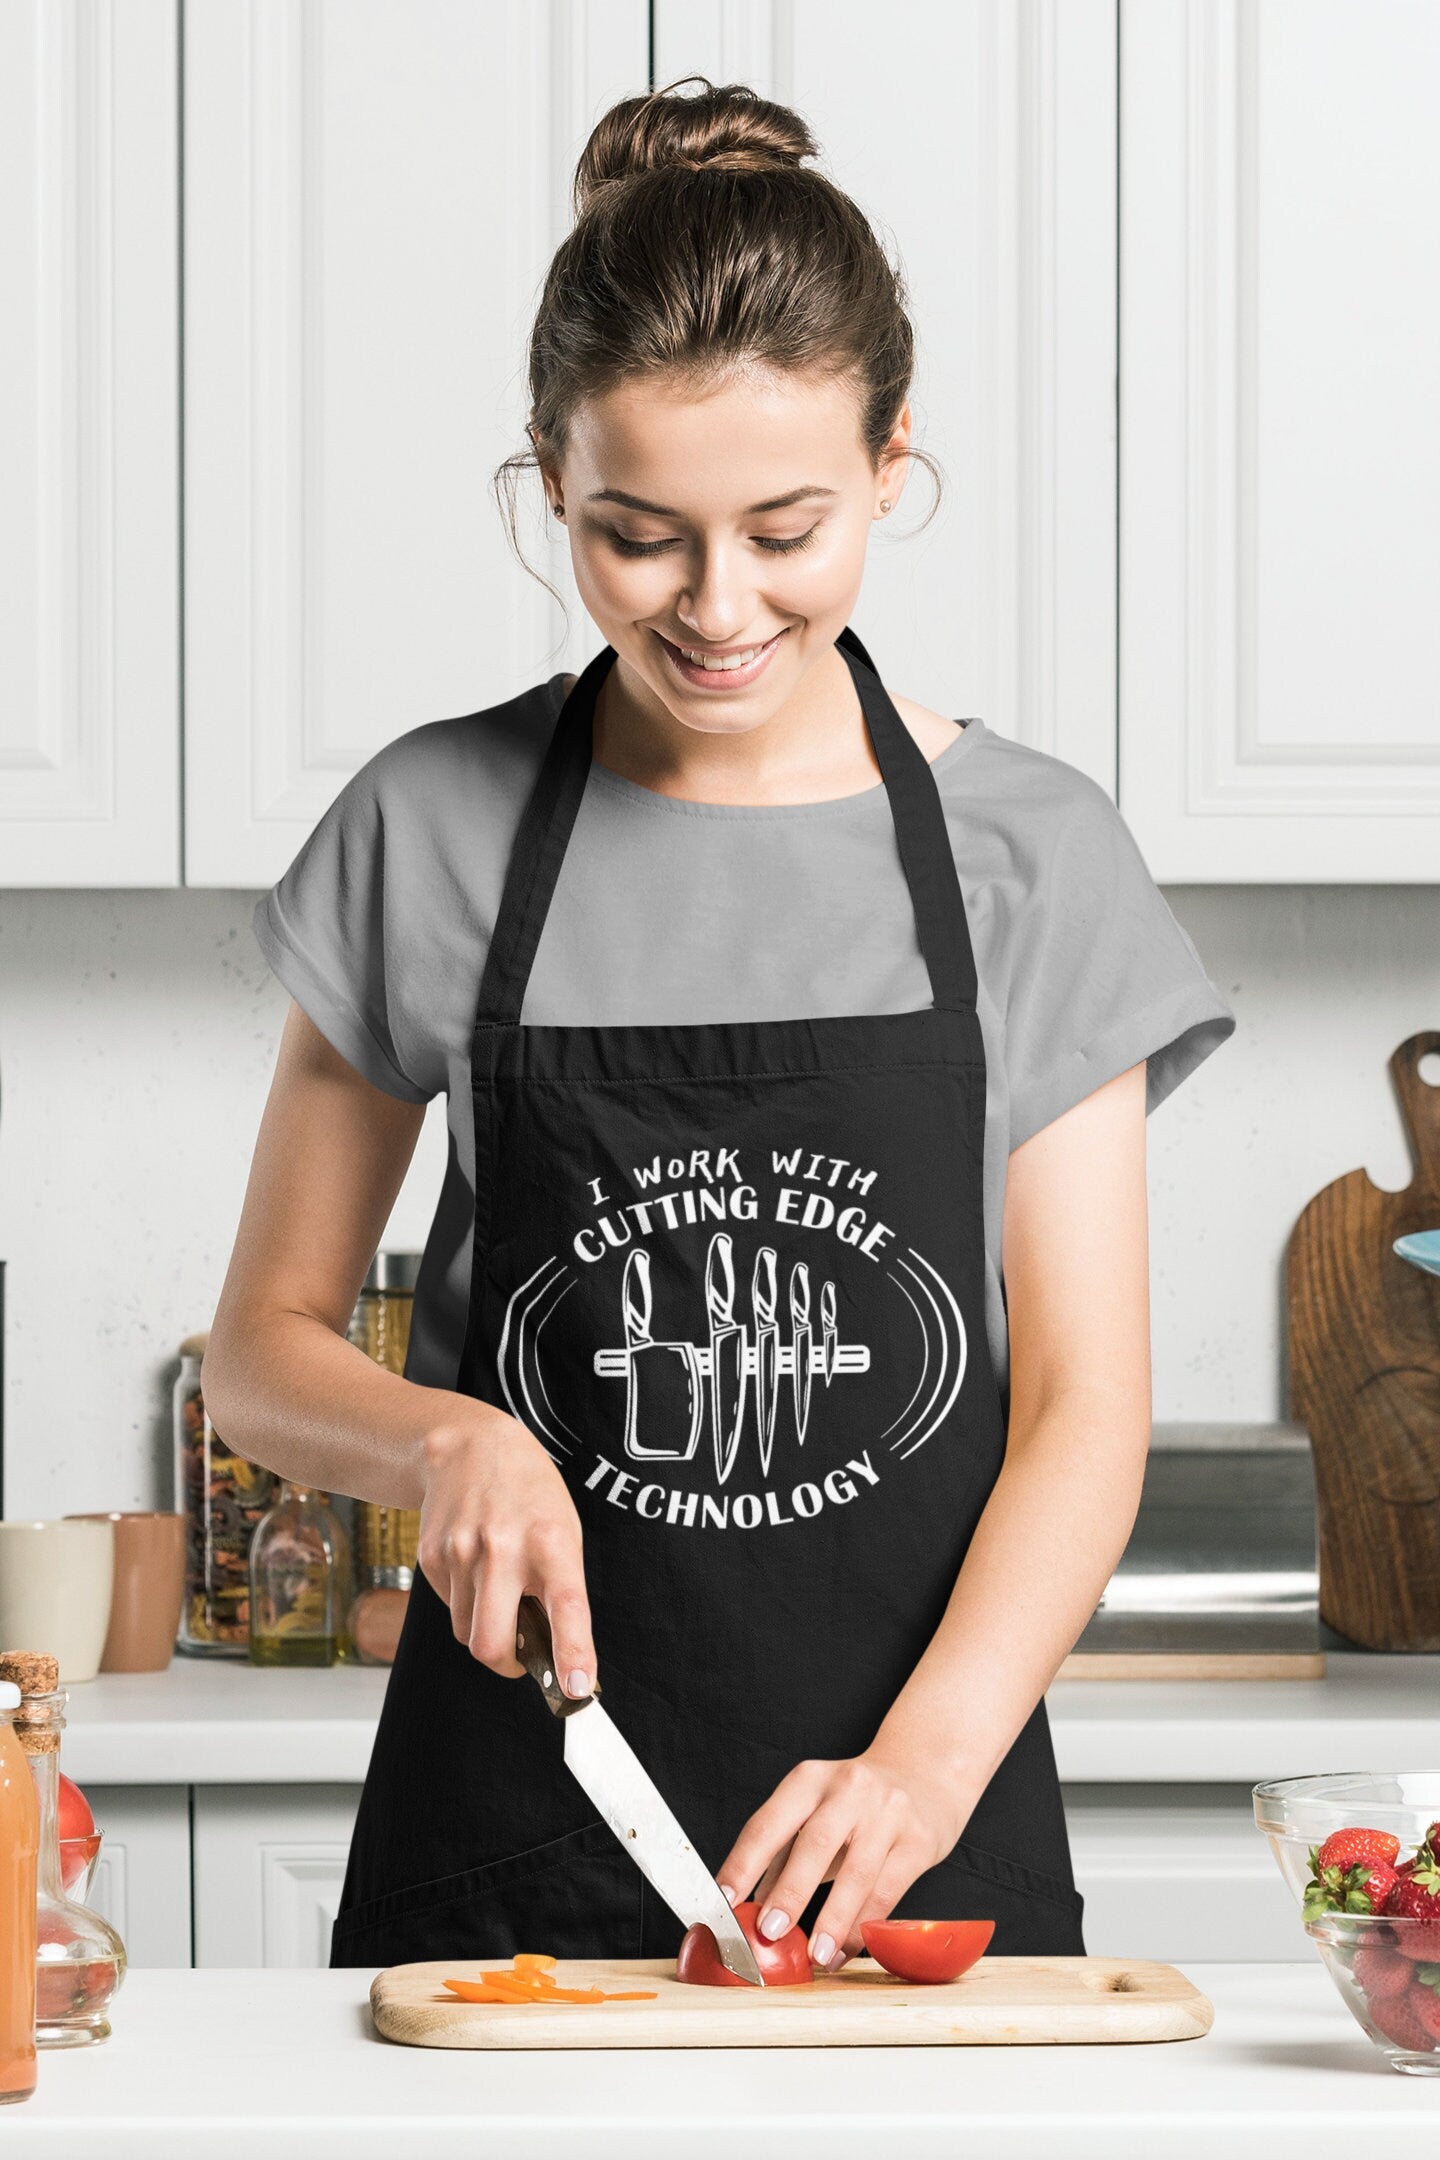 Funny Chef Apron, I Work With Cutting Edge Technology Pun Gift Idea, Humorous Chef Cook Knives Apron